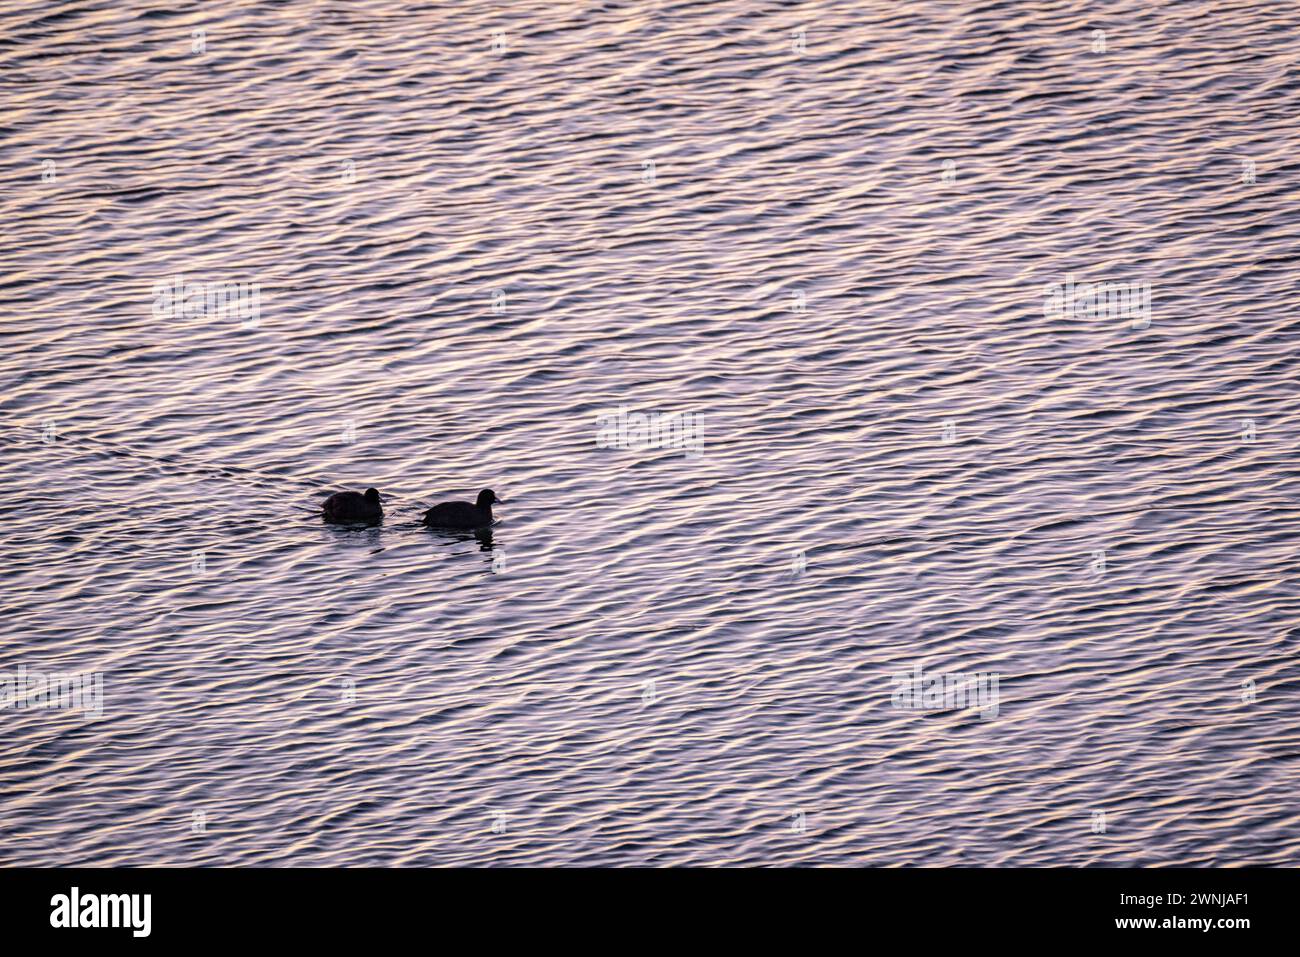 Some common coots (Fulica atra) at dawn in the Ebro river seen from the Zigurat viewpoint, at the mouth of the Ebro River. Tarragona, Catalonia, Spain Stock Photo